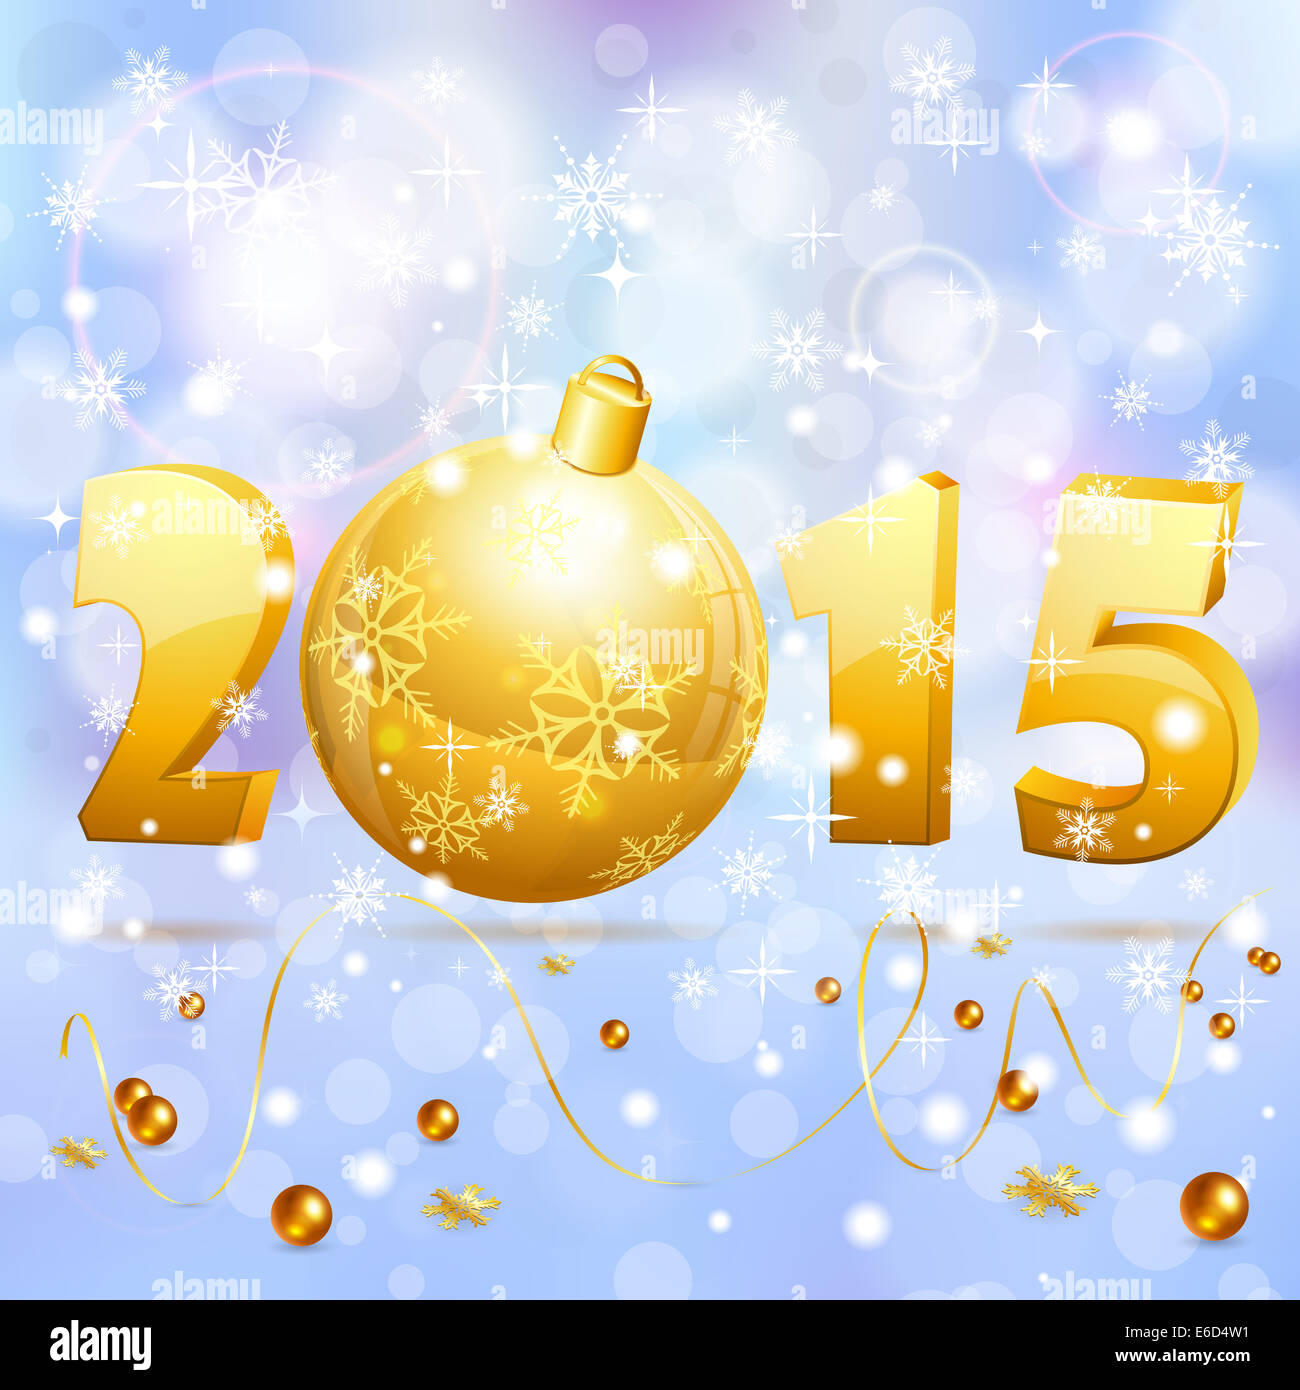 New Year background with stylized 2015 with Bauble, element for design, illustration Stock Photo